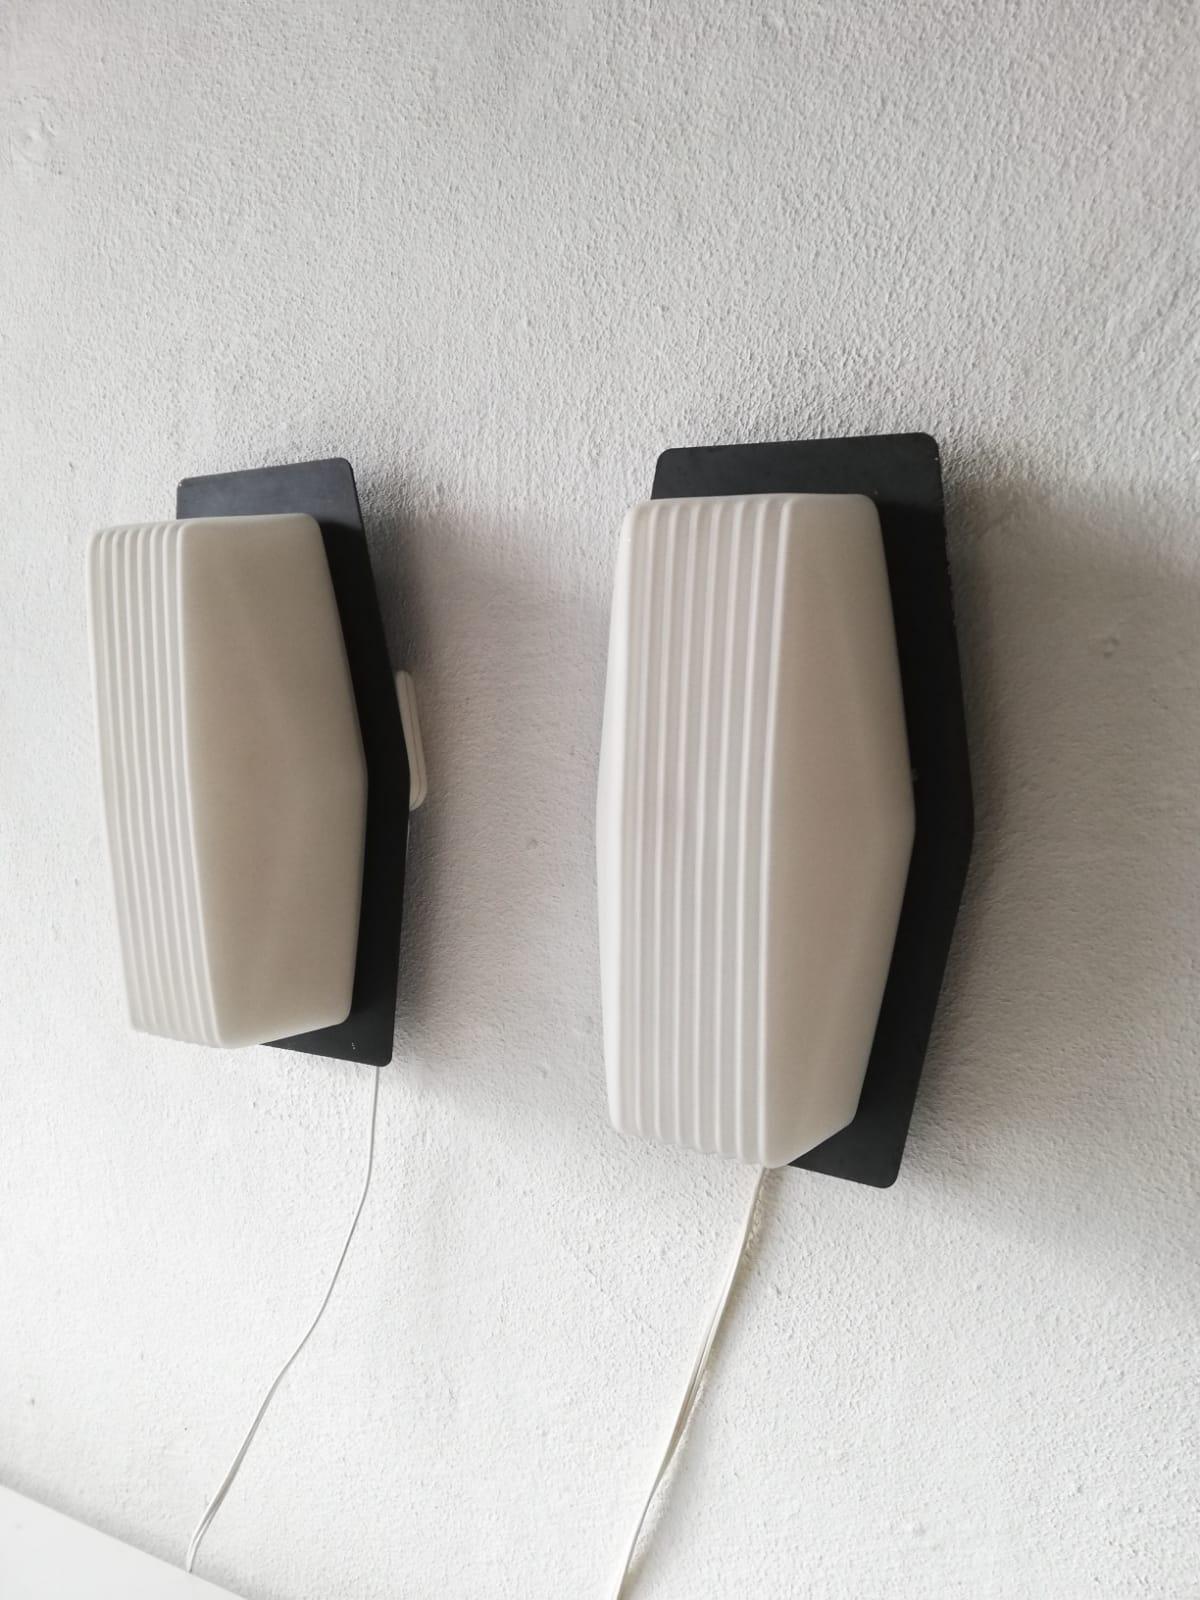 Textured opaline glass pair of sconces by BEGA, 1960s Germany

Rare and Minimalist wall lamps.

Lamps are in very good vintage condition.

These lamps works with E27 standard light bulbs. 
Wired and suitable to use in all countries. (110-220